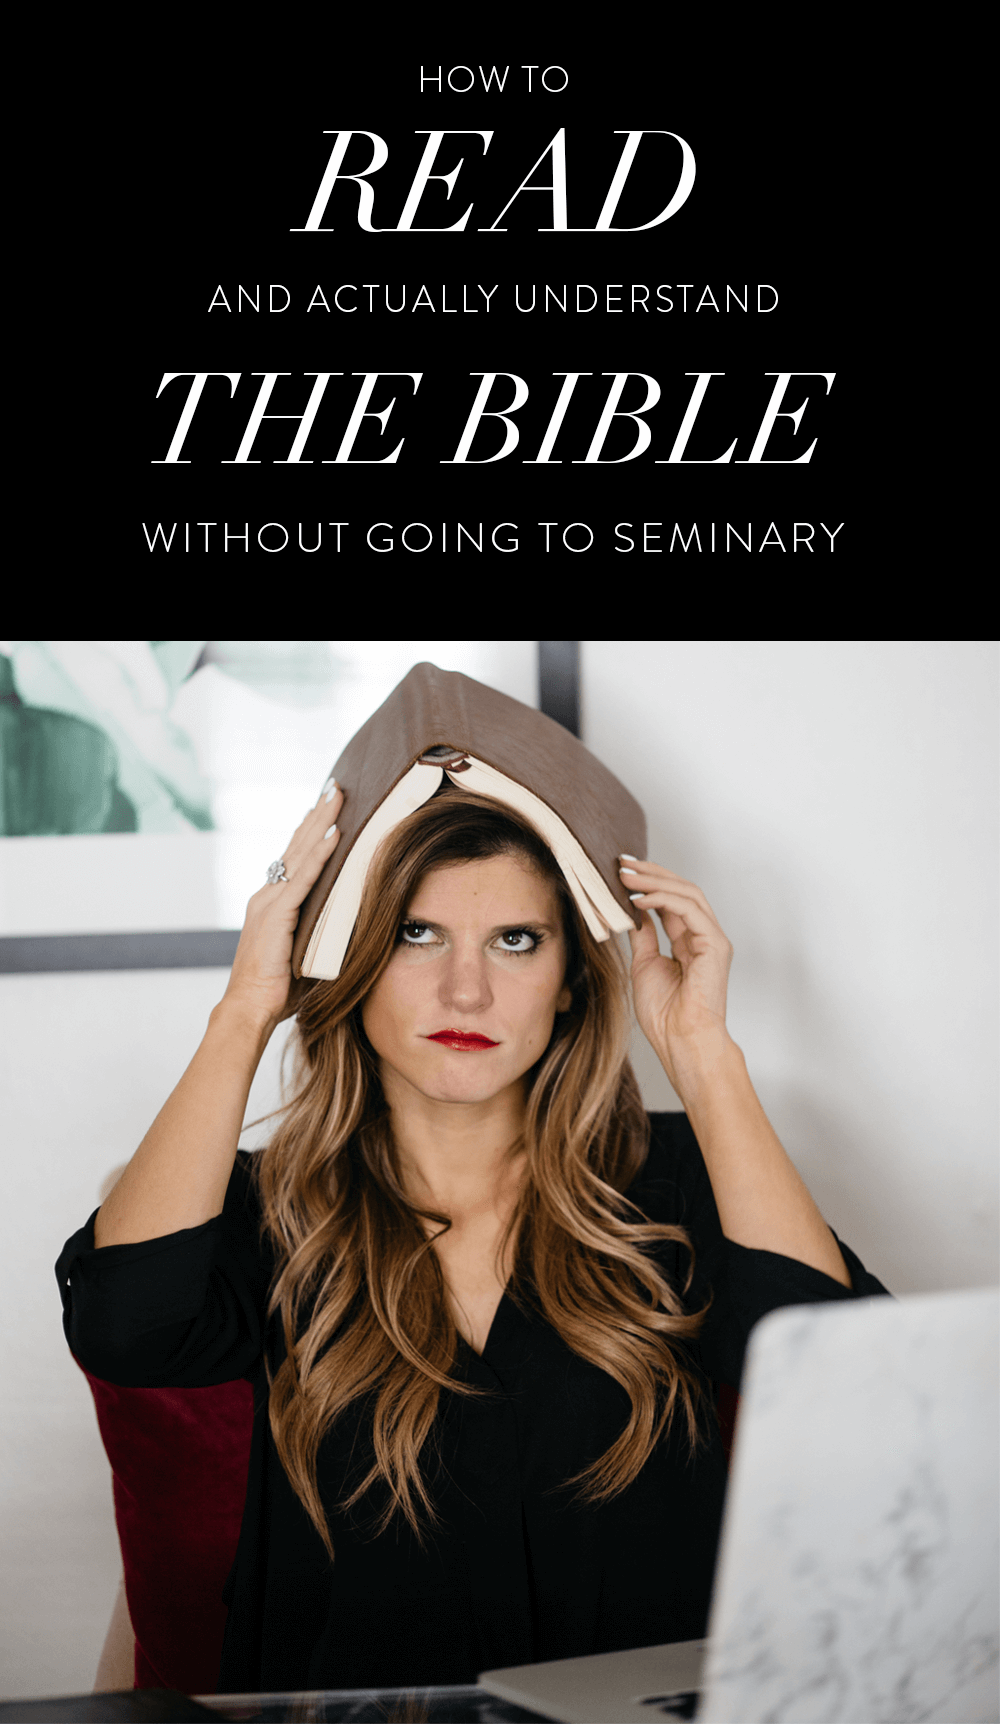 HERE’S HOW TO UNDERSTAND THE BIBLE WITHOUT GOING TO SEMINARY